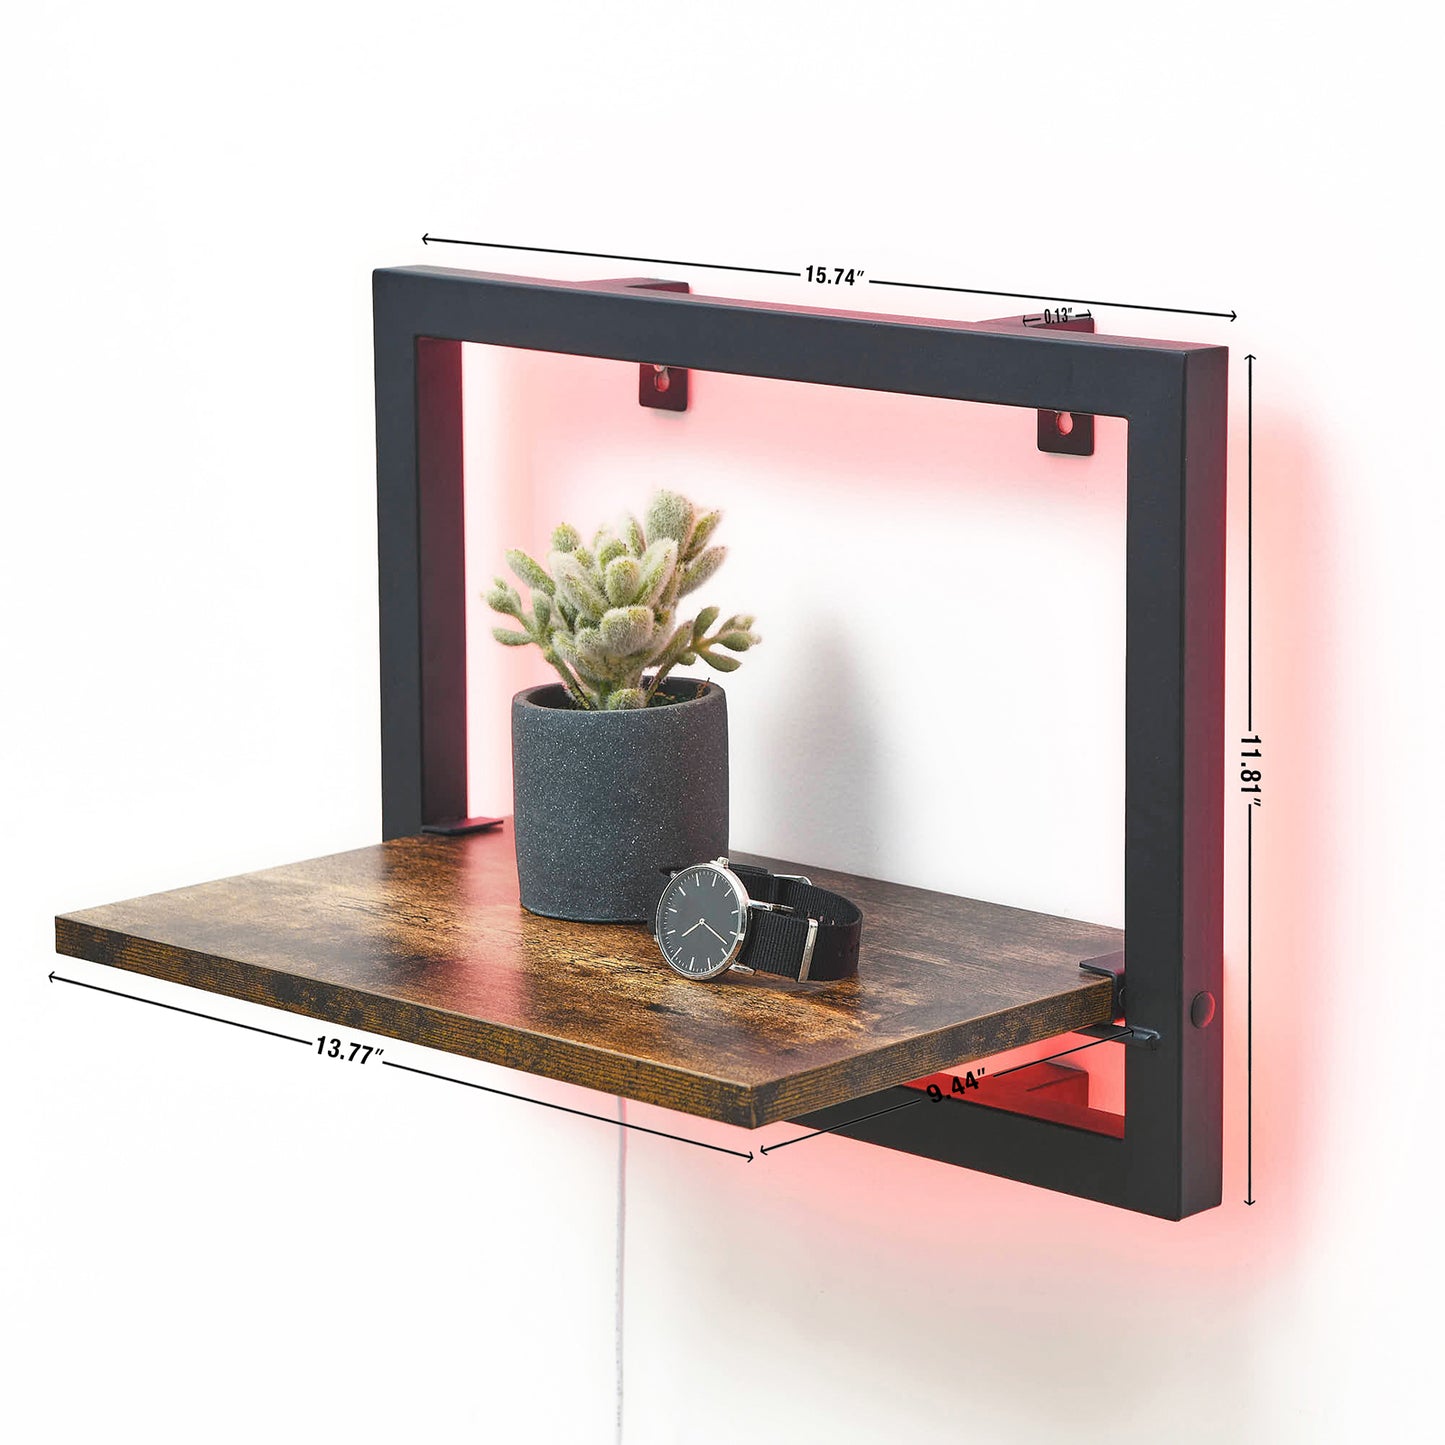 HMOREY LED Floating Display Shelf with Built-in Illuminated Lights Wall Mounted